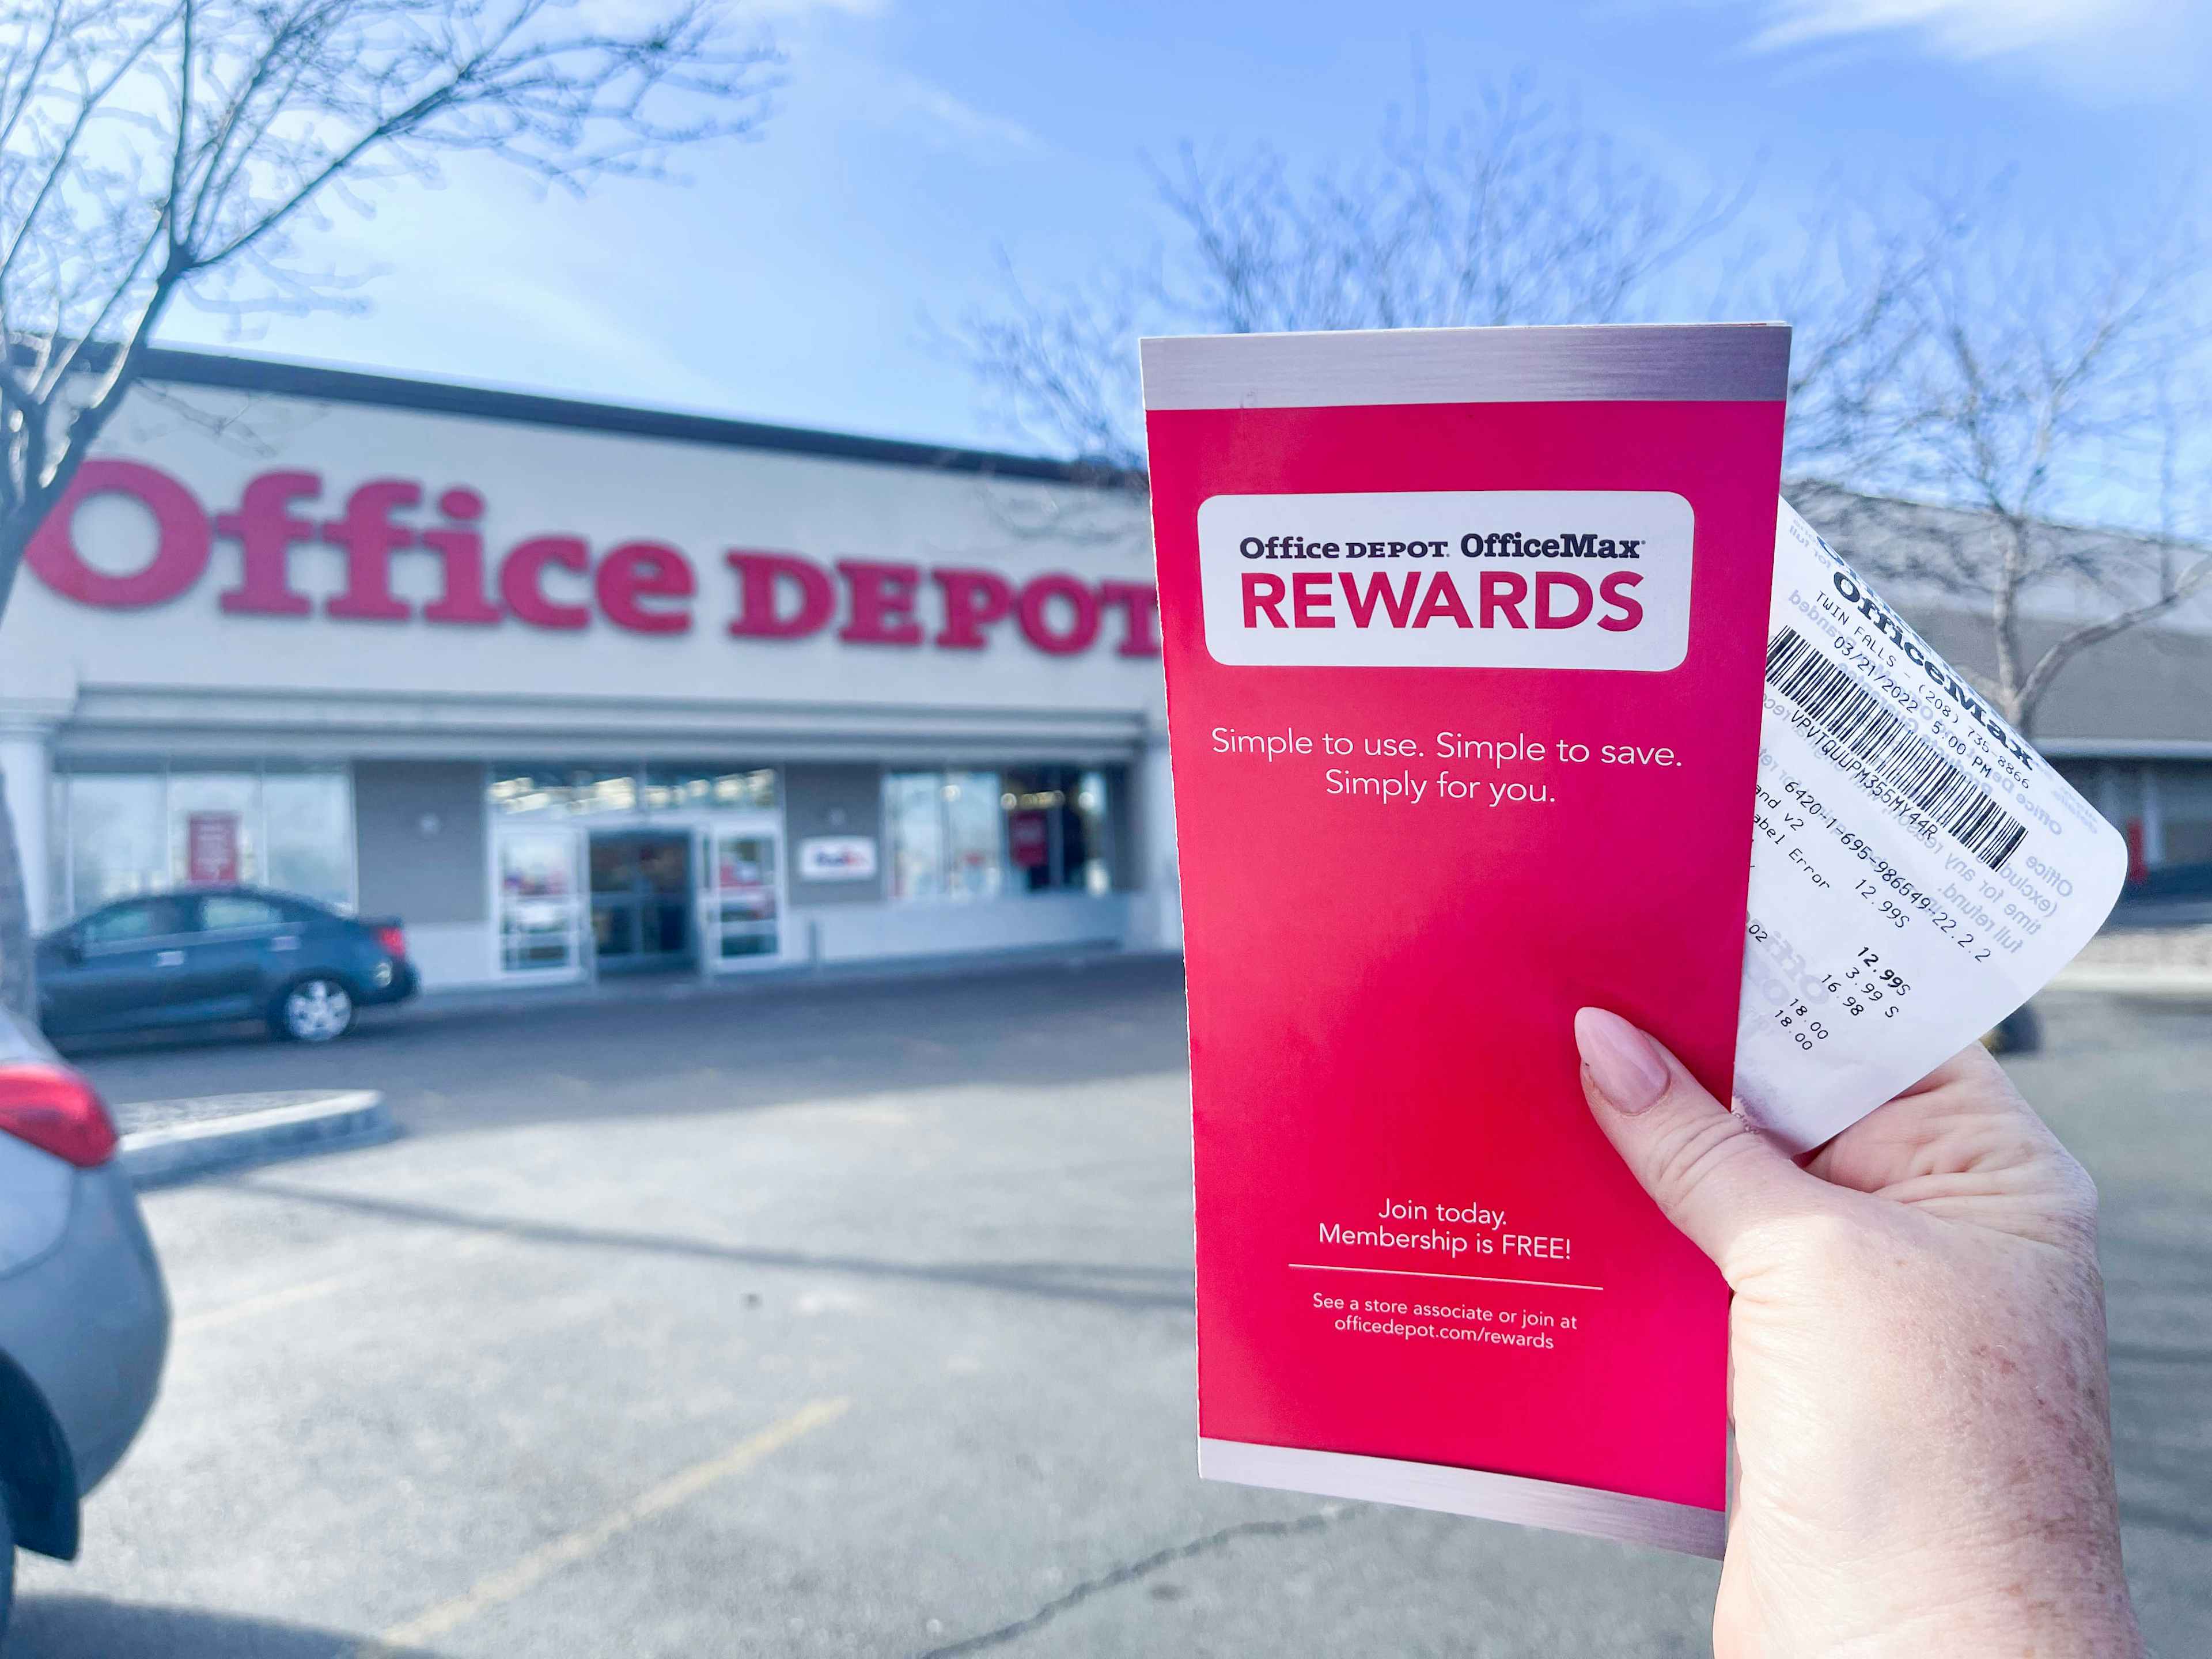 A person's hand holding up an Office Depot rewards brochure and a receipt outside of an Office Depot store.